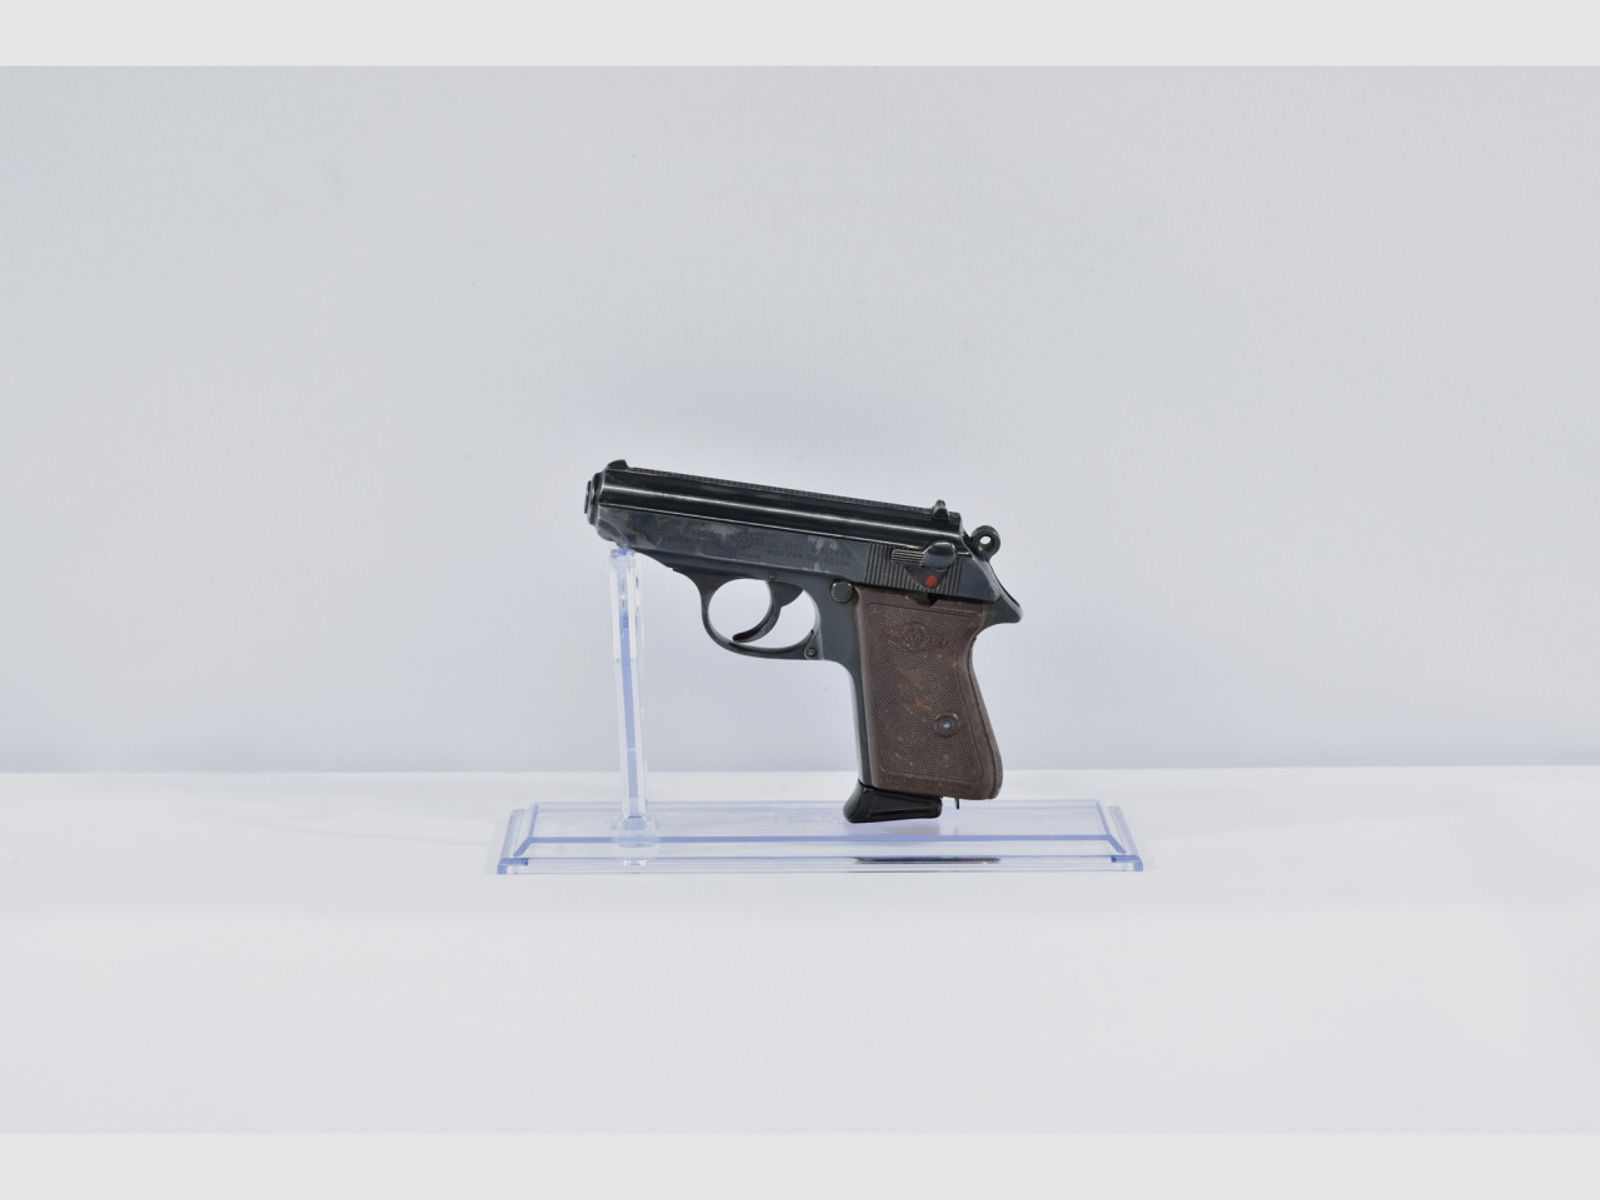 Walther PPK 7,65mmBrowning Pistole